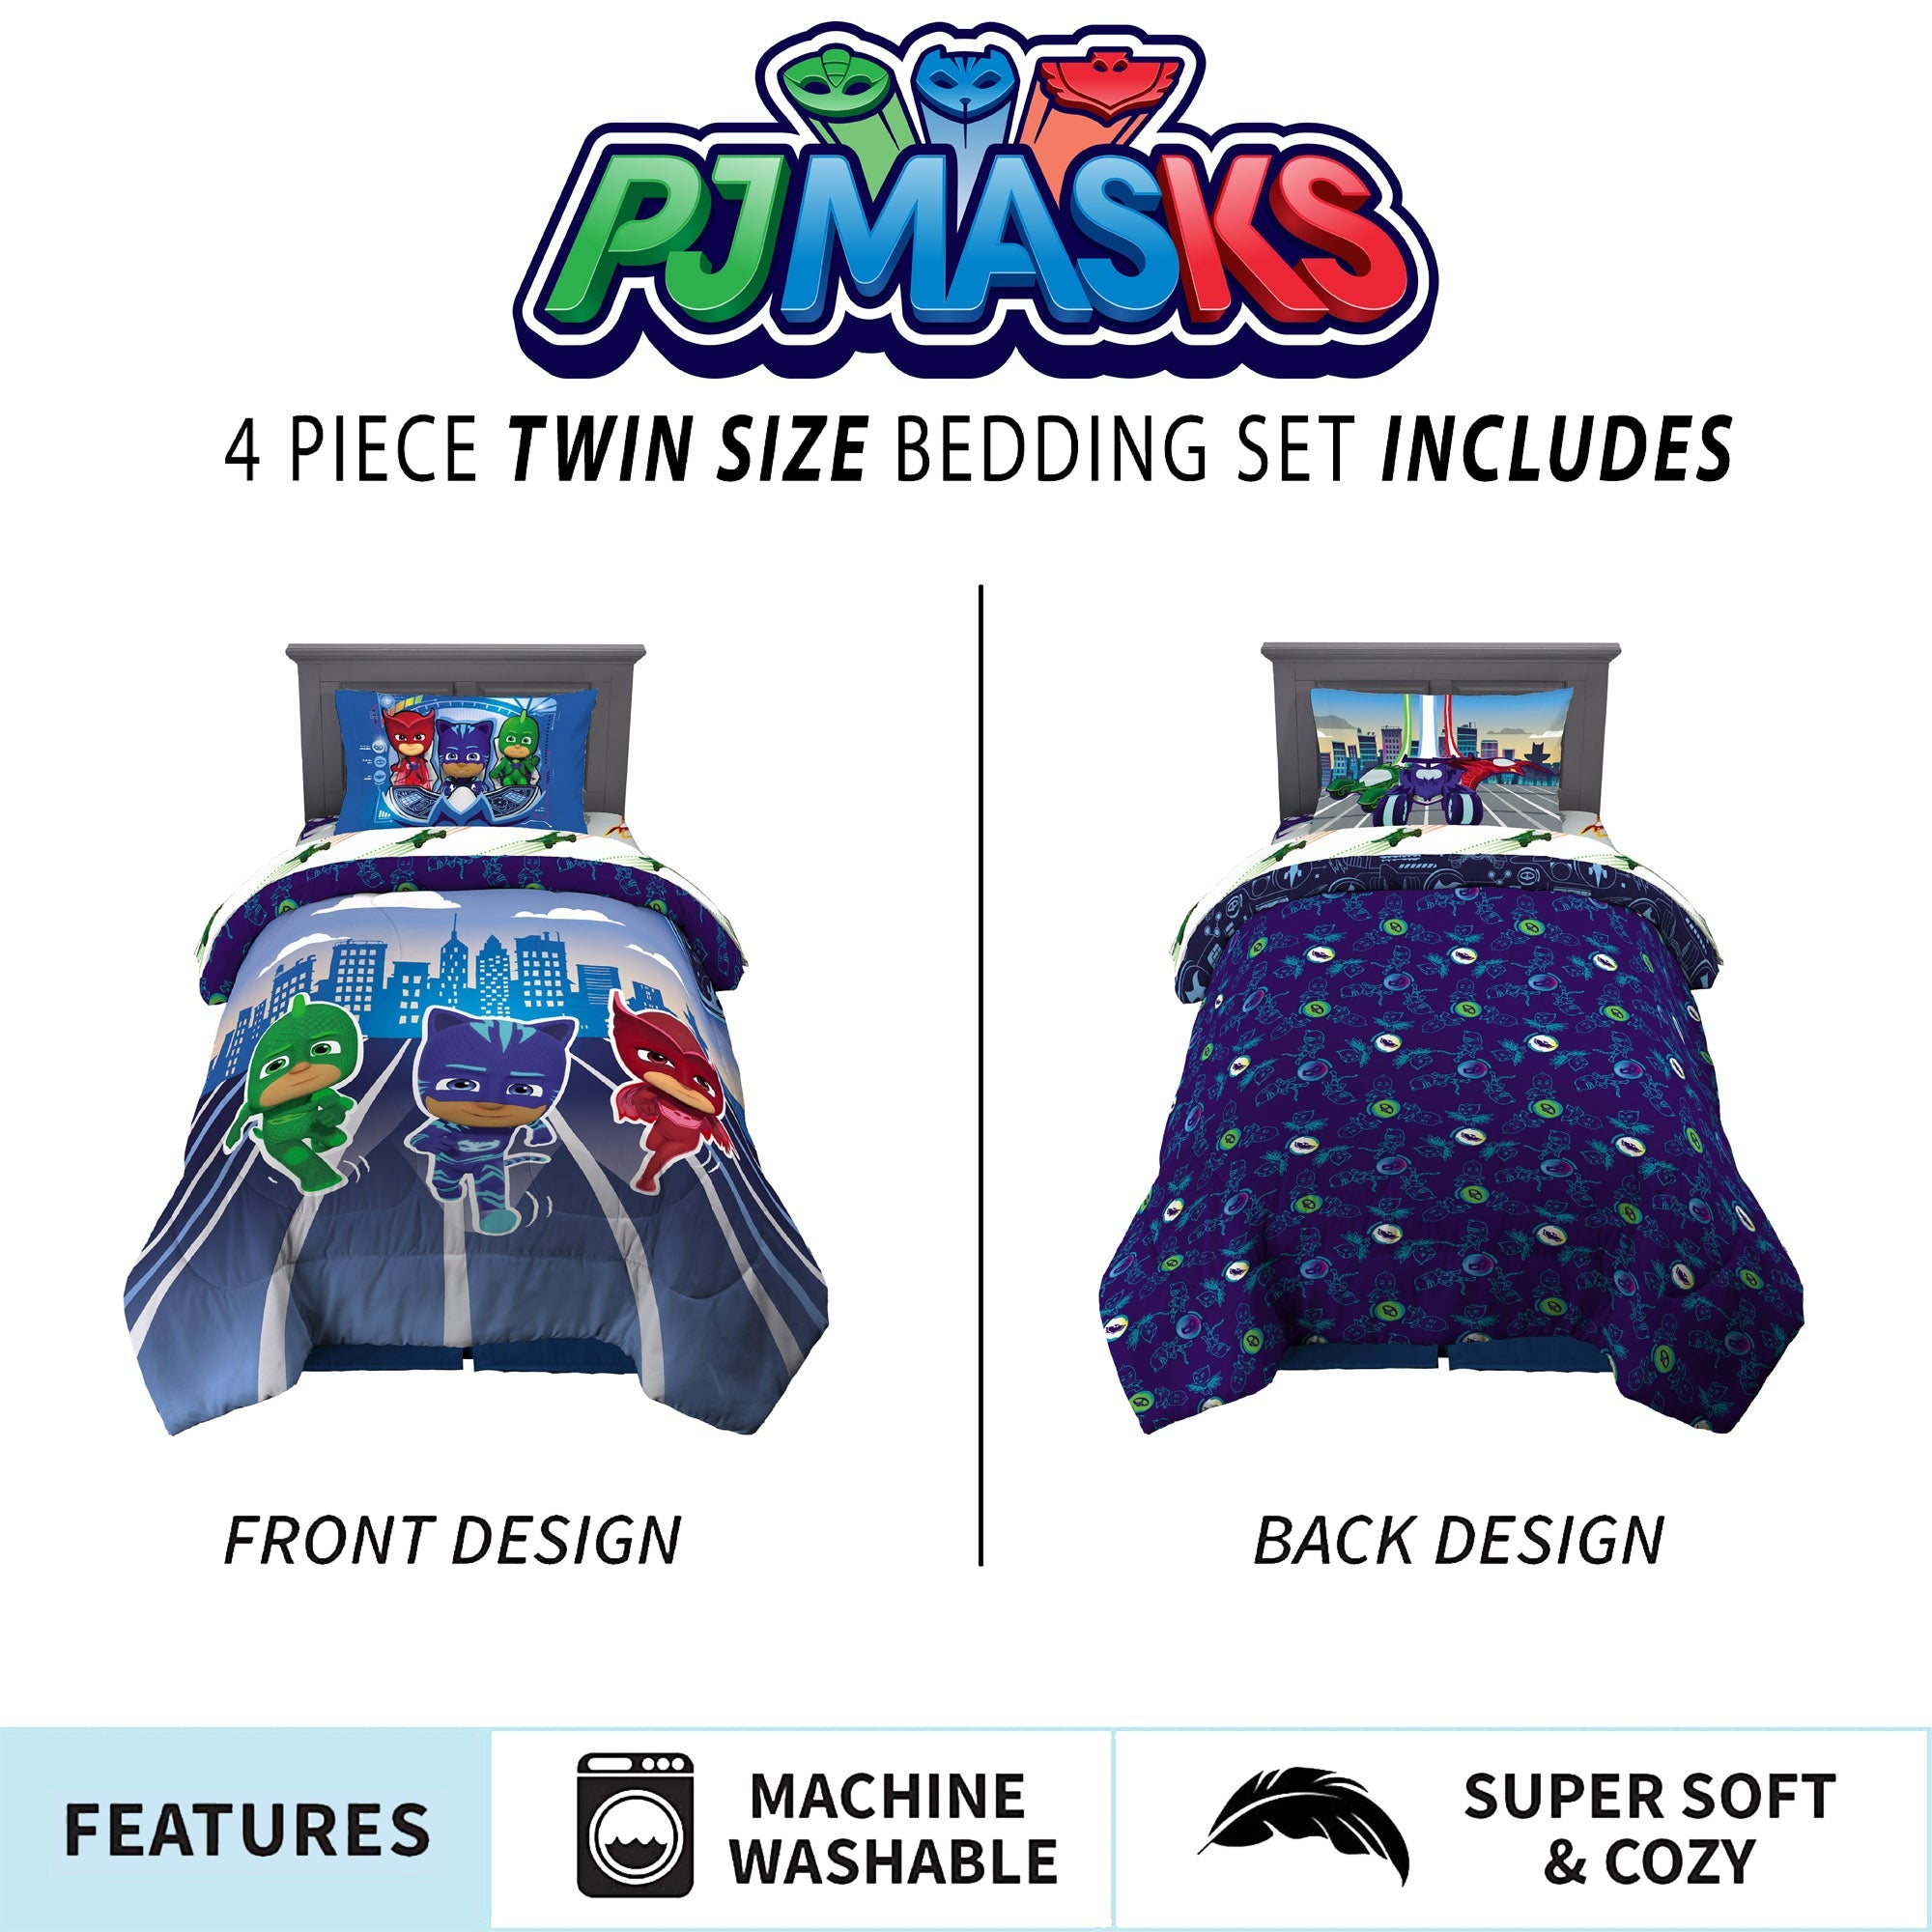 PJ Masks Kids Twin Bed in a Bag, Comforter and Sheets, Blue, Hasbro